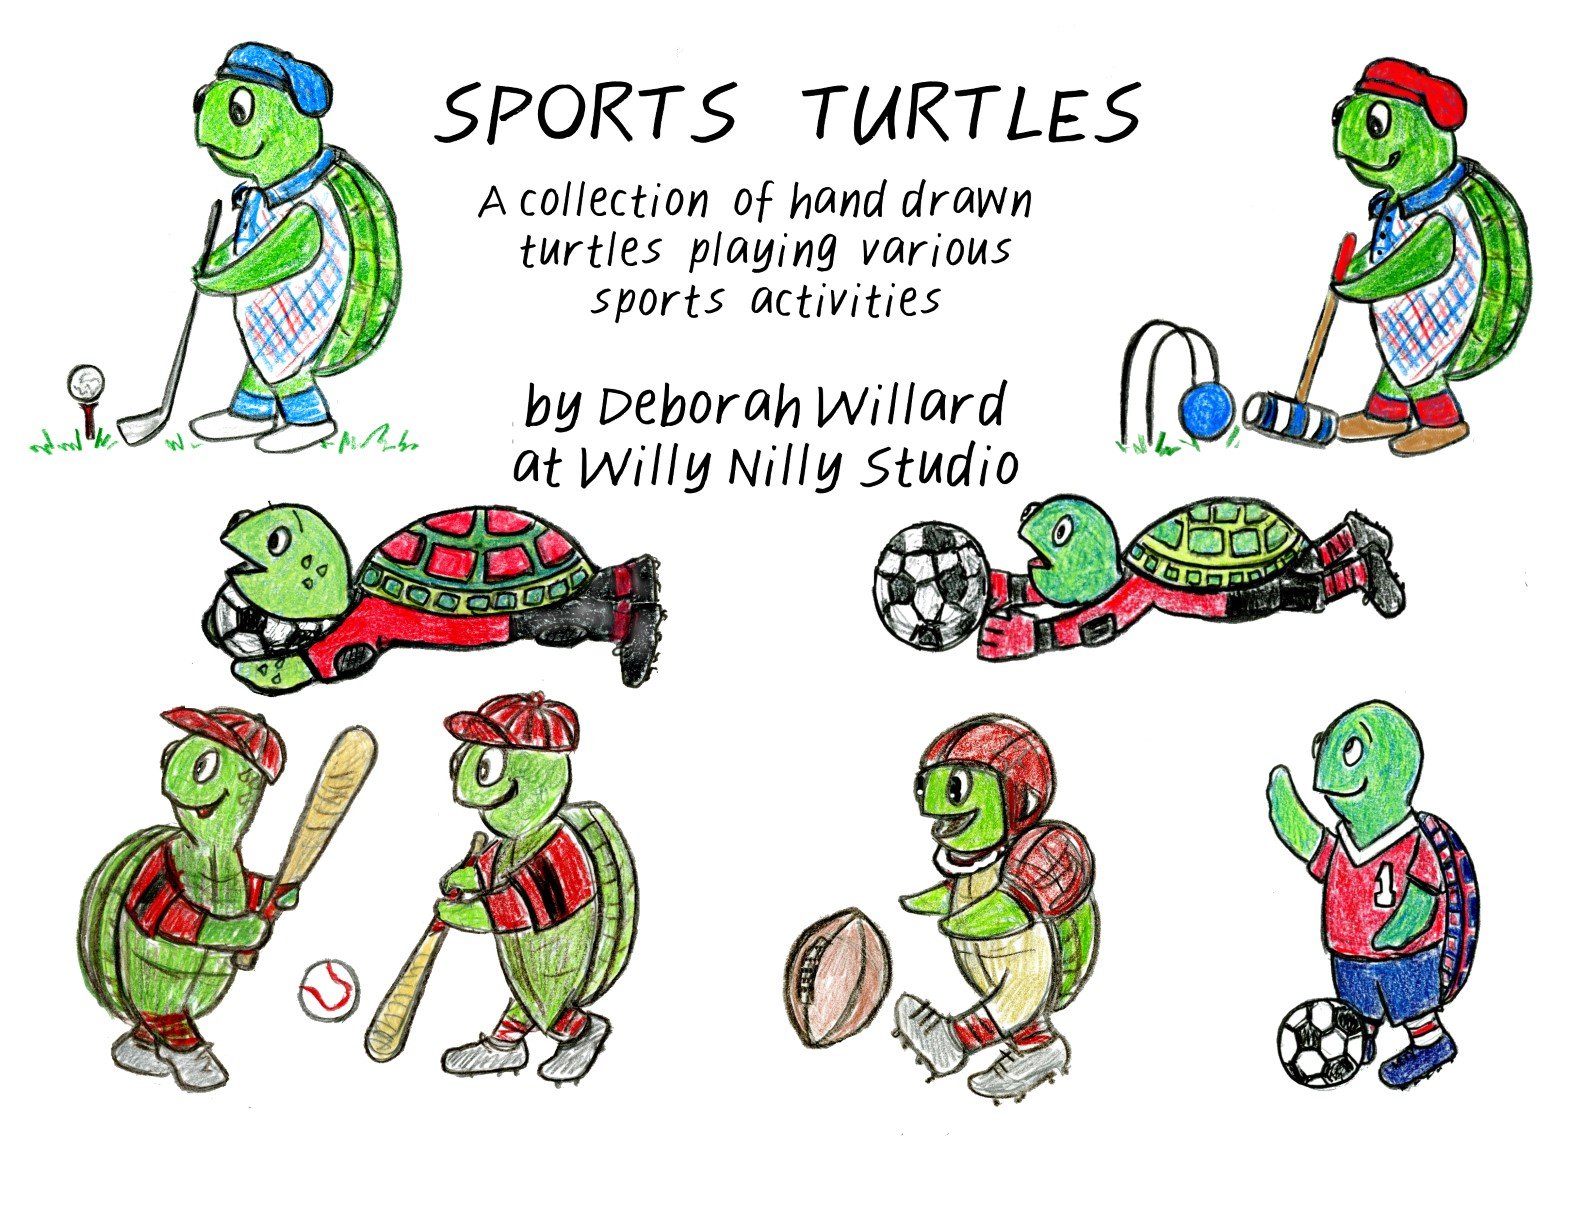 Sports Turtles Hand Drawn cover image.